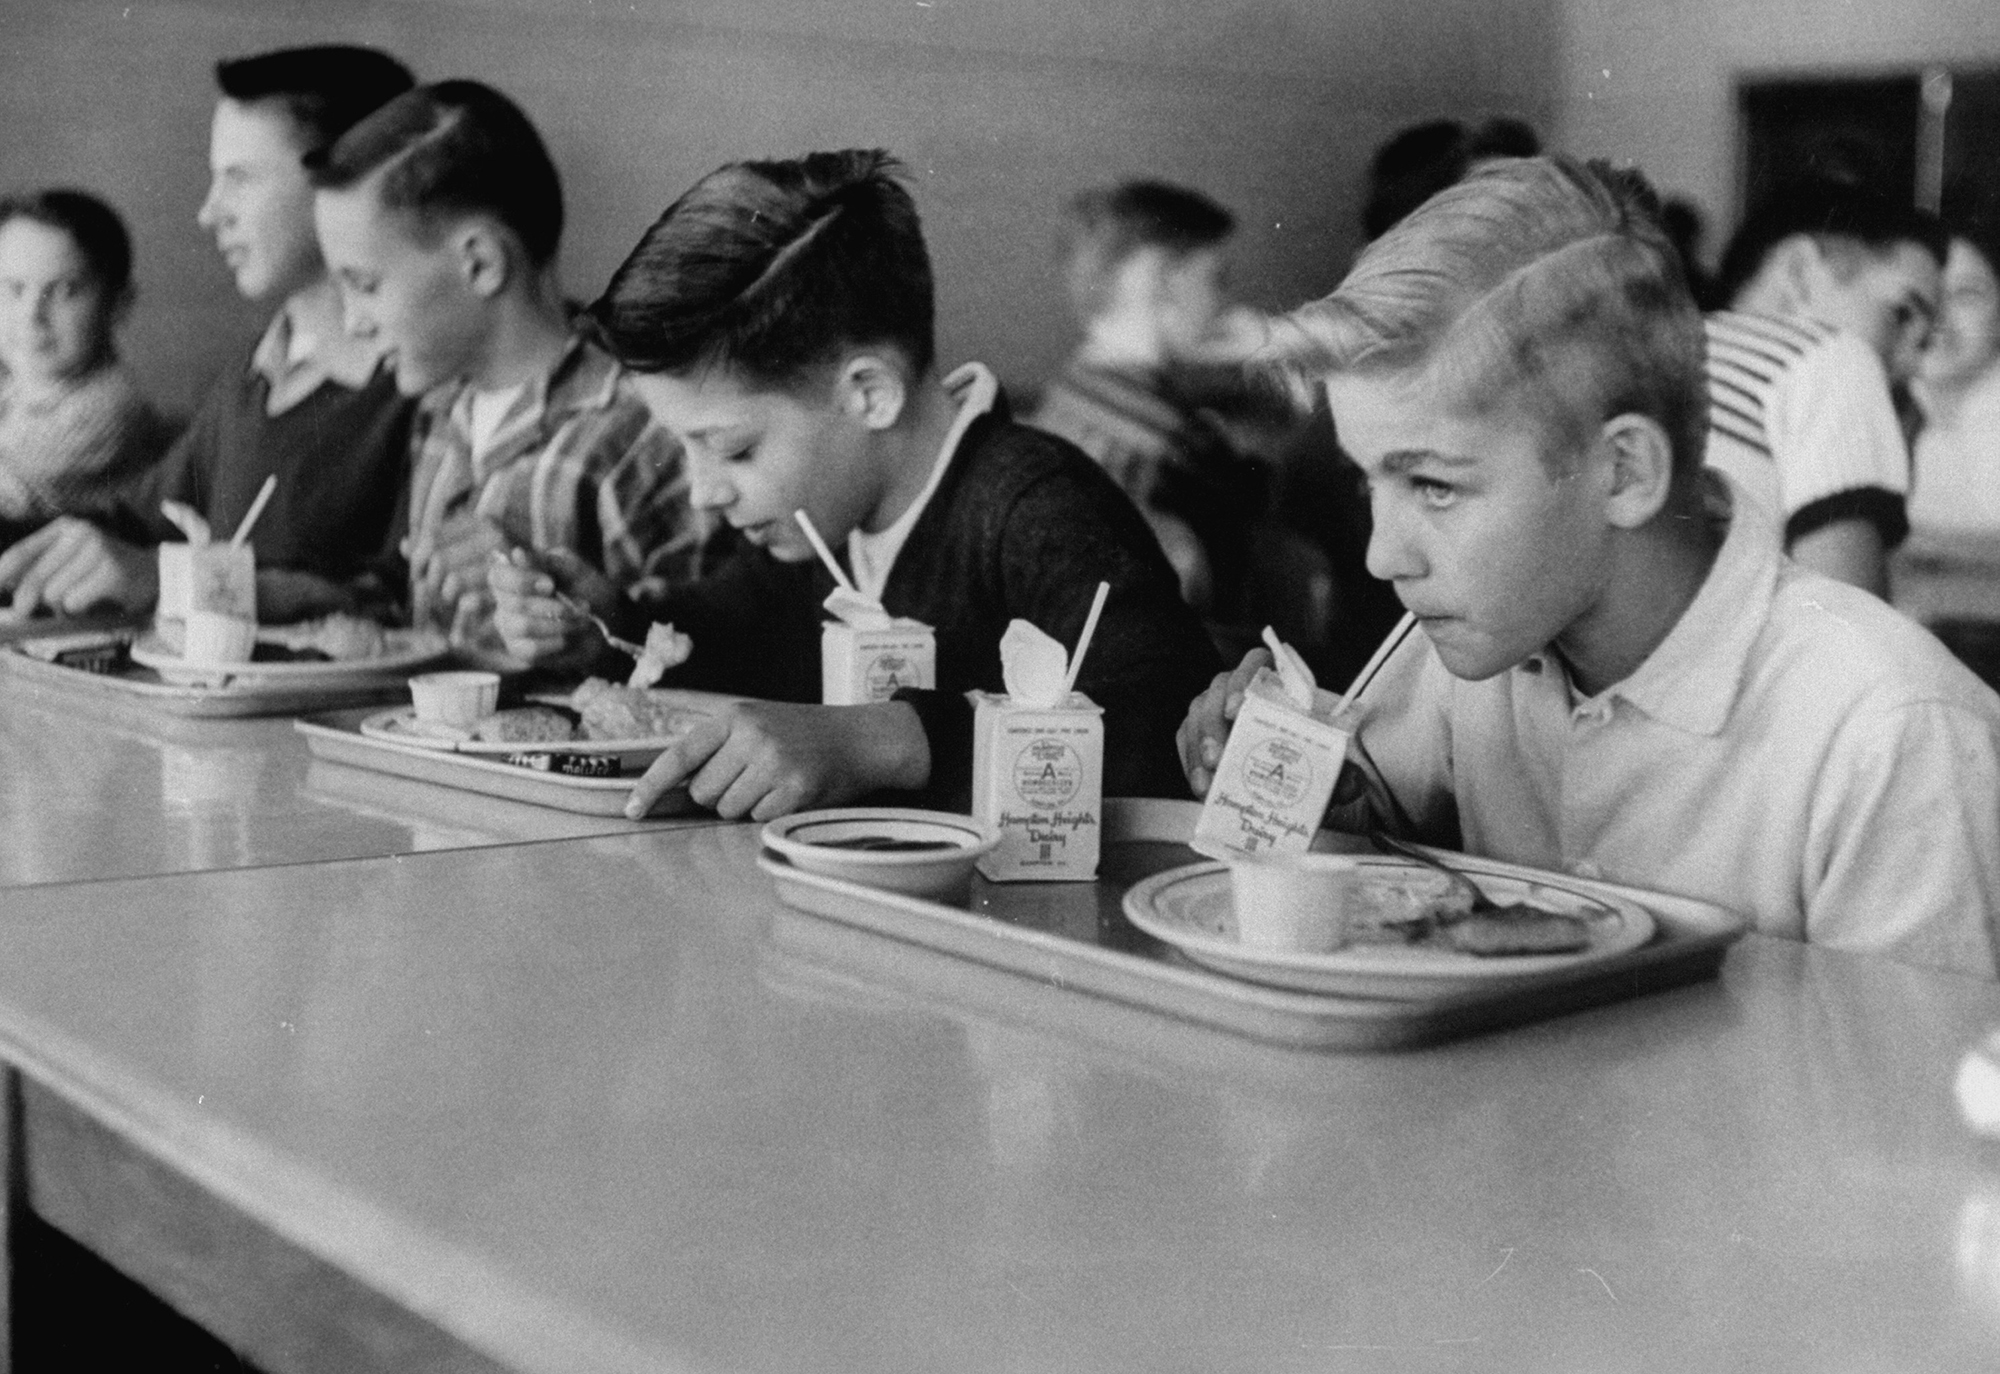 Boys eating in the school cafeteria.  (P